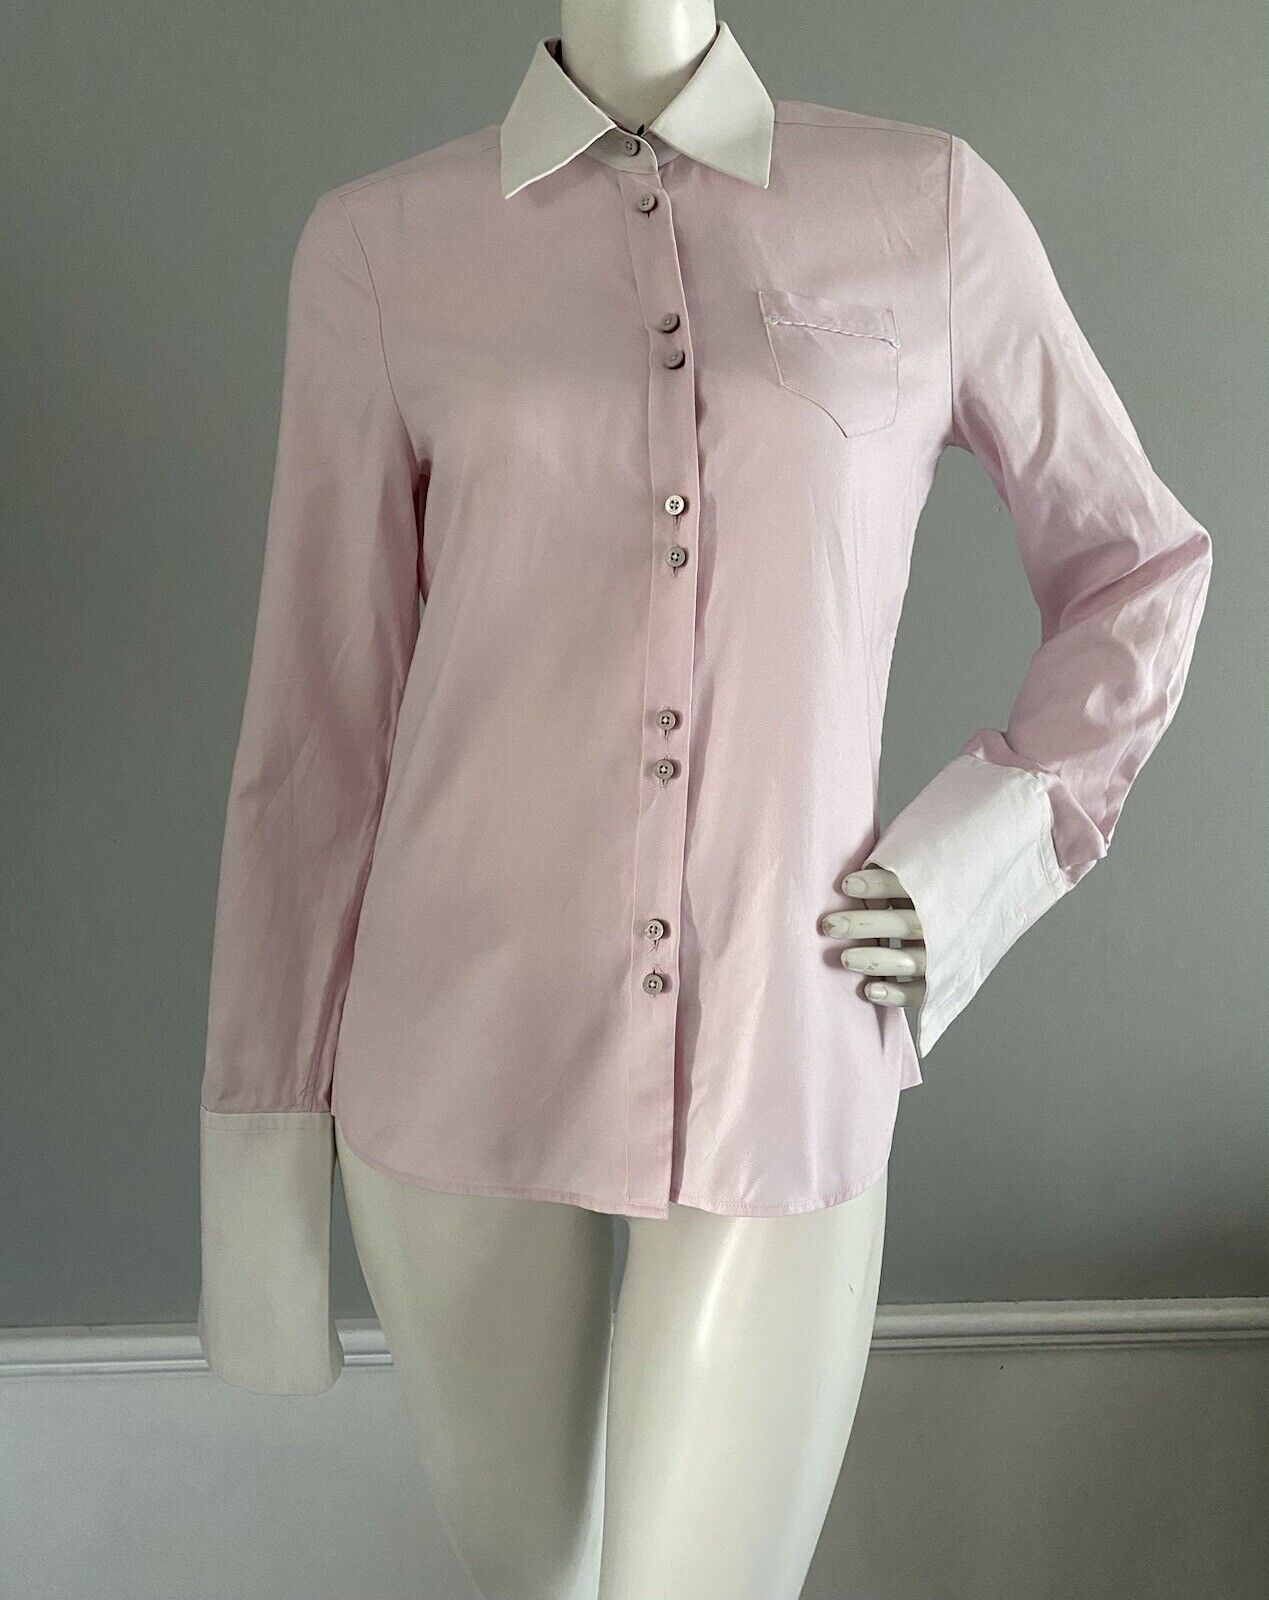 Vintage Escada Sport Button Up French Cuff Shirt Top Blouse Pink Womens Size 34